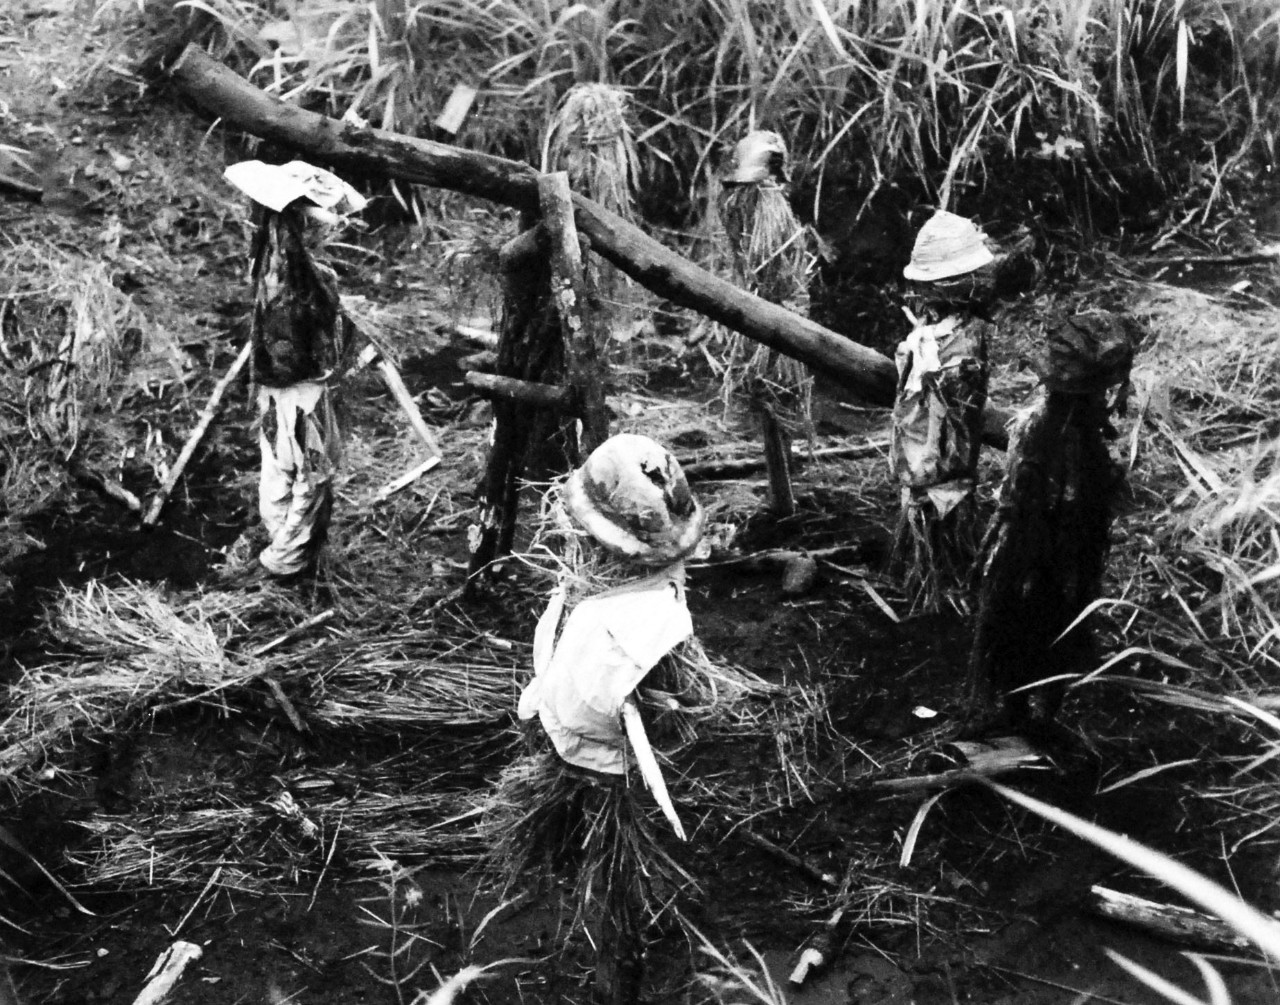 127-GW-970-71518: Battle of Cape Gloucester, New Britain, December 1943-January 1944. Dummy Japanese gun crew. To make Marines think the enemy was strong in one section on Cape Gloucester, the Japanese rigged up this scarecrow gun and crew. Photo...